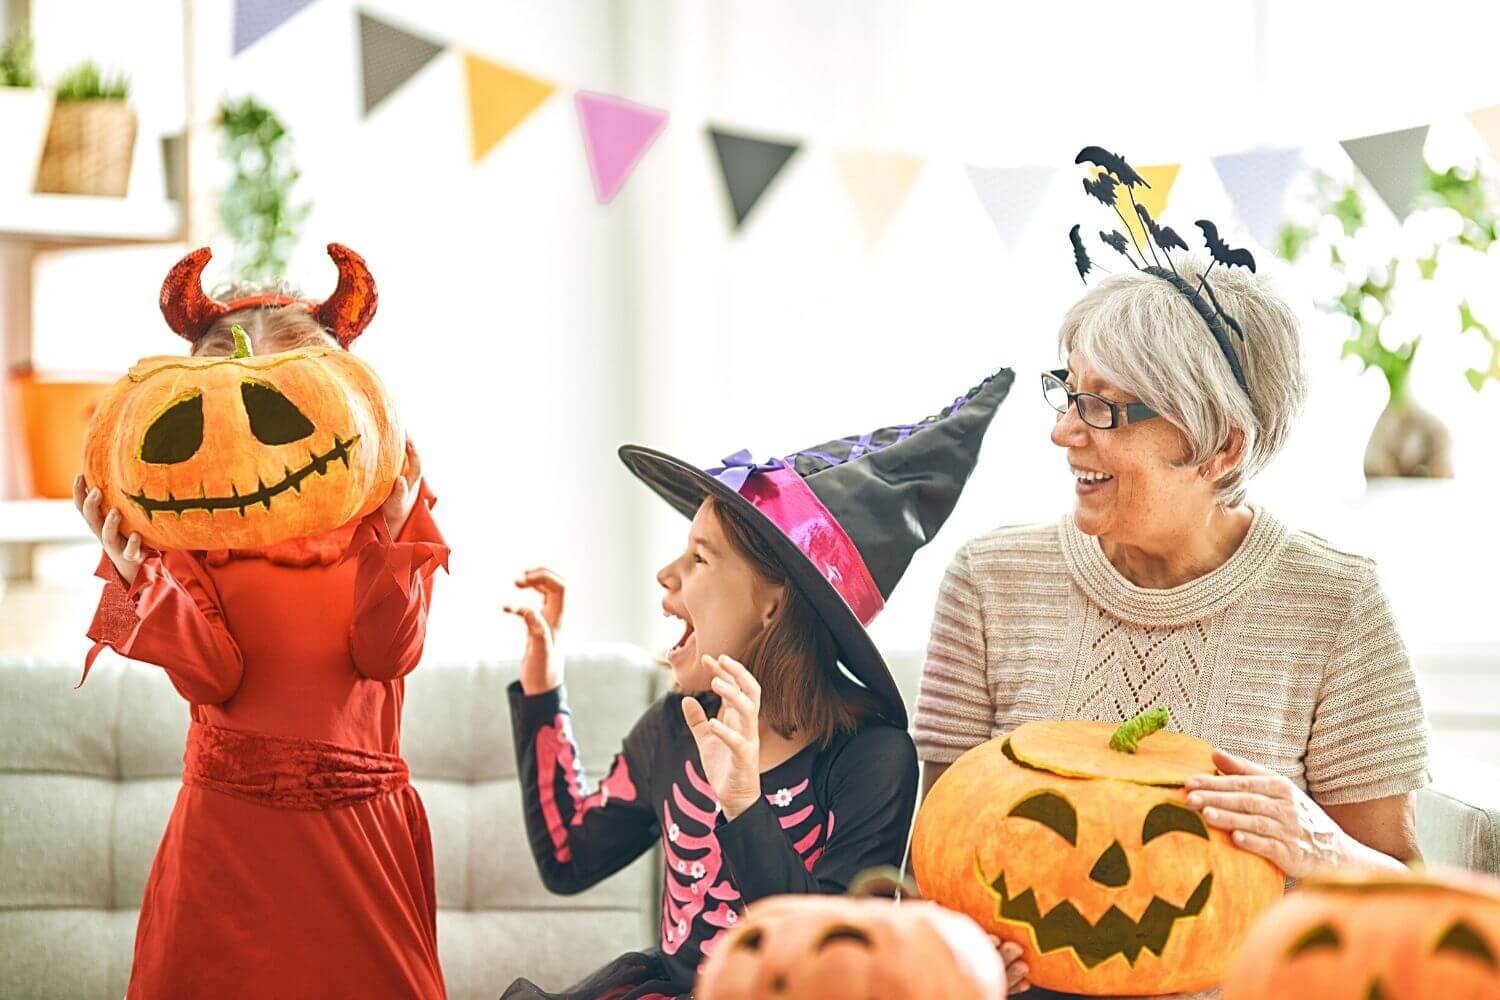 halloween 2020 kids events near me today 2020 Halloween Activities For Kids At Home This Year halloween 2020 kids events near me today